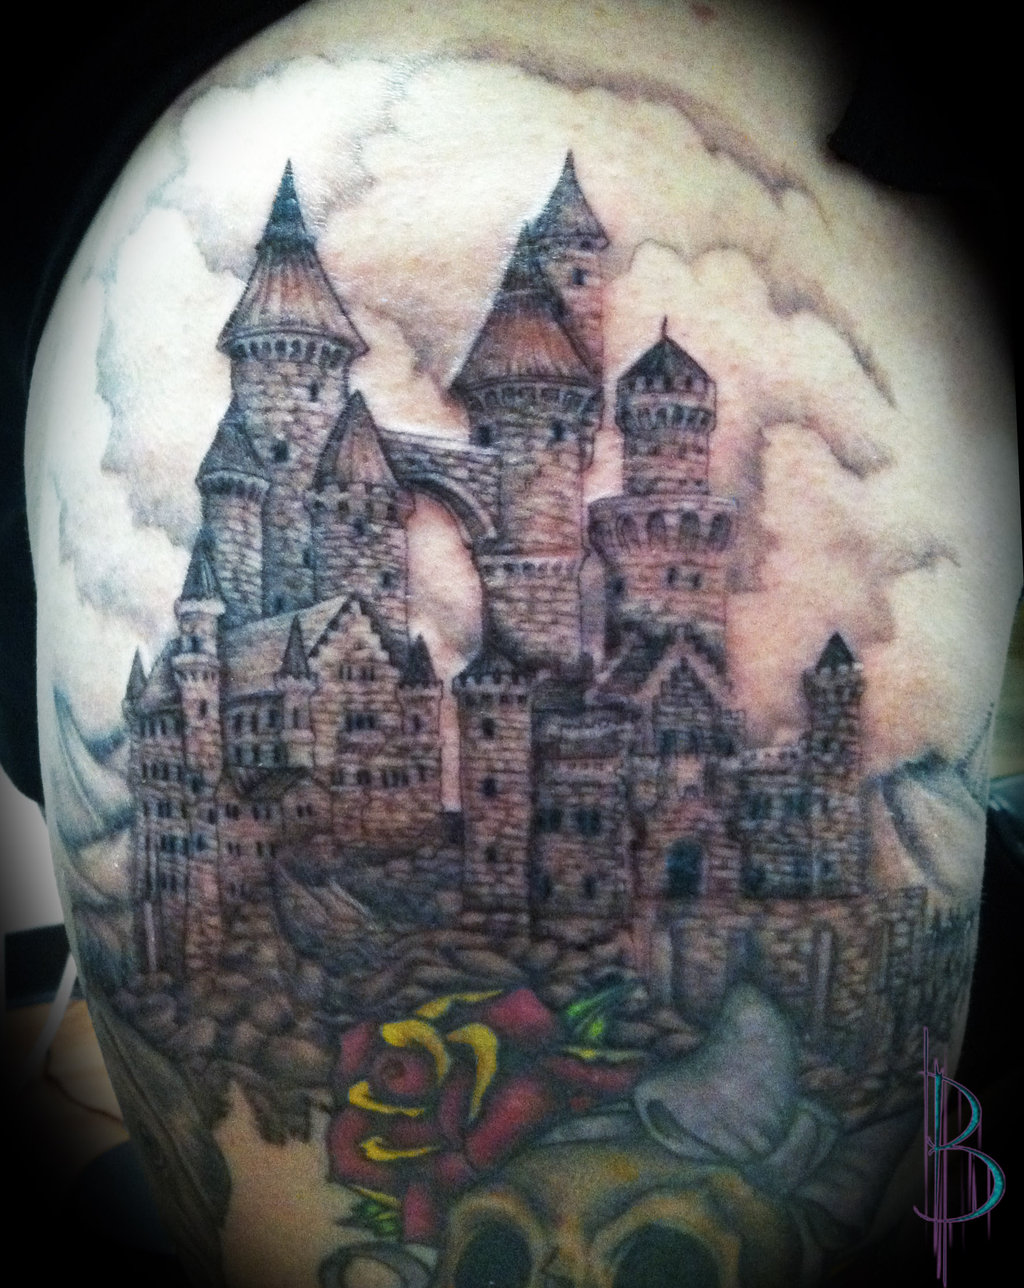 35+ Awesome Castle Tattoos